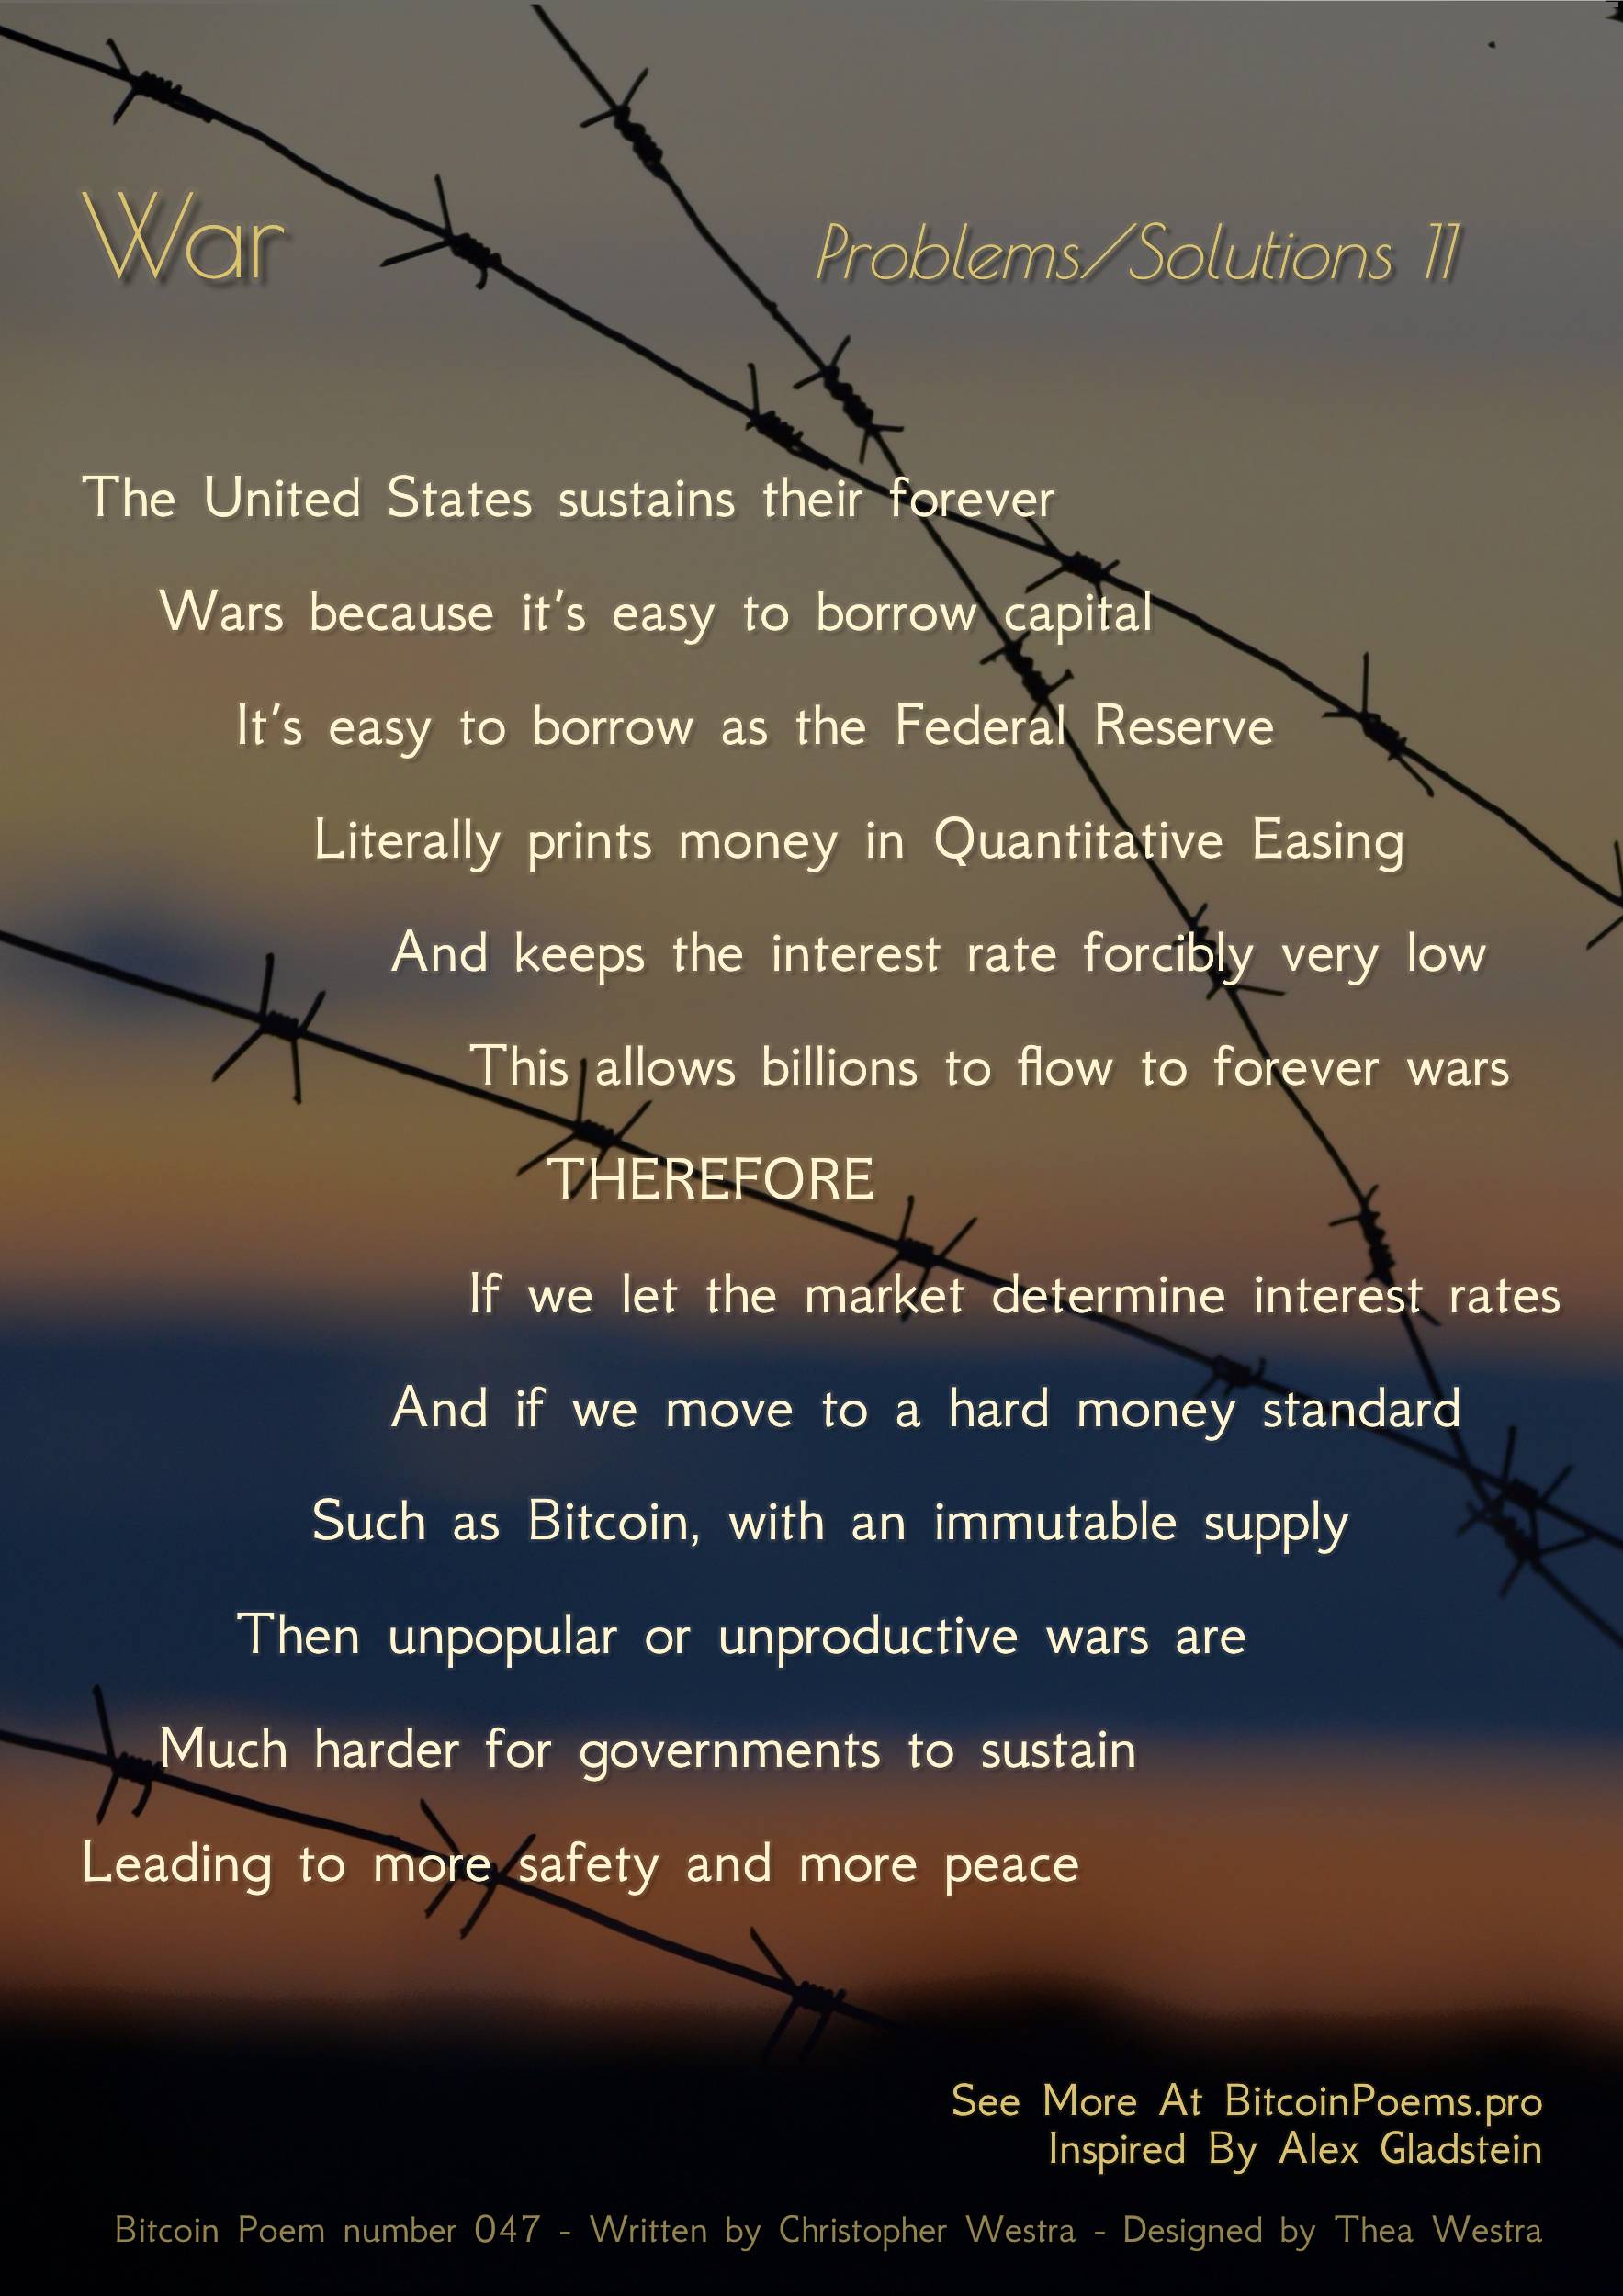 War - Bitcoin Poem 047 by Christopher Westra